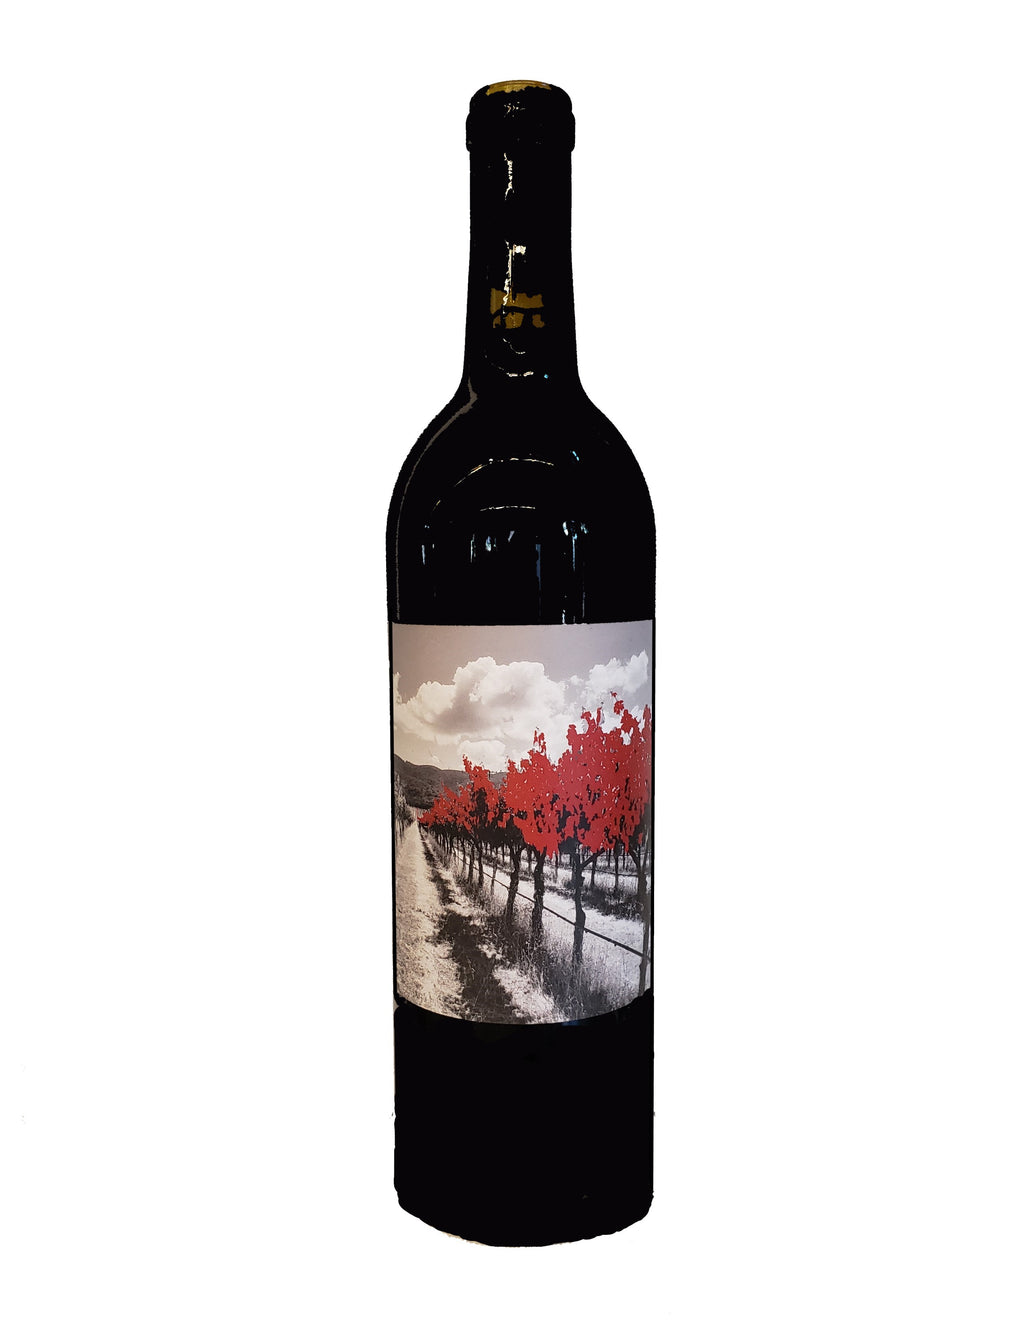 Bordeaux-style bottle with the Wine Snob* 2021 Carménère label showing a row of vines with red leaves in a vineyard.